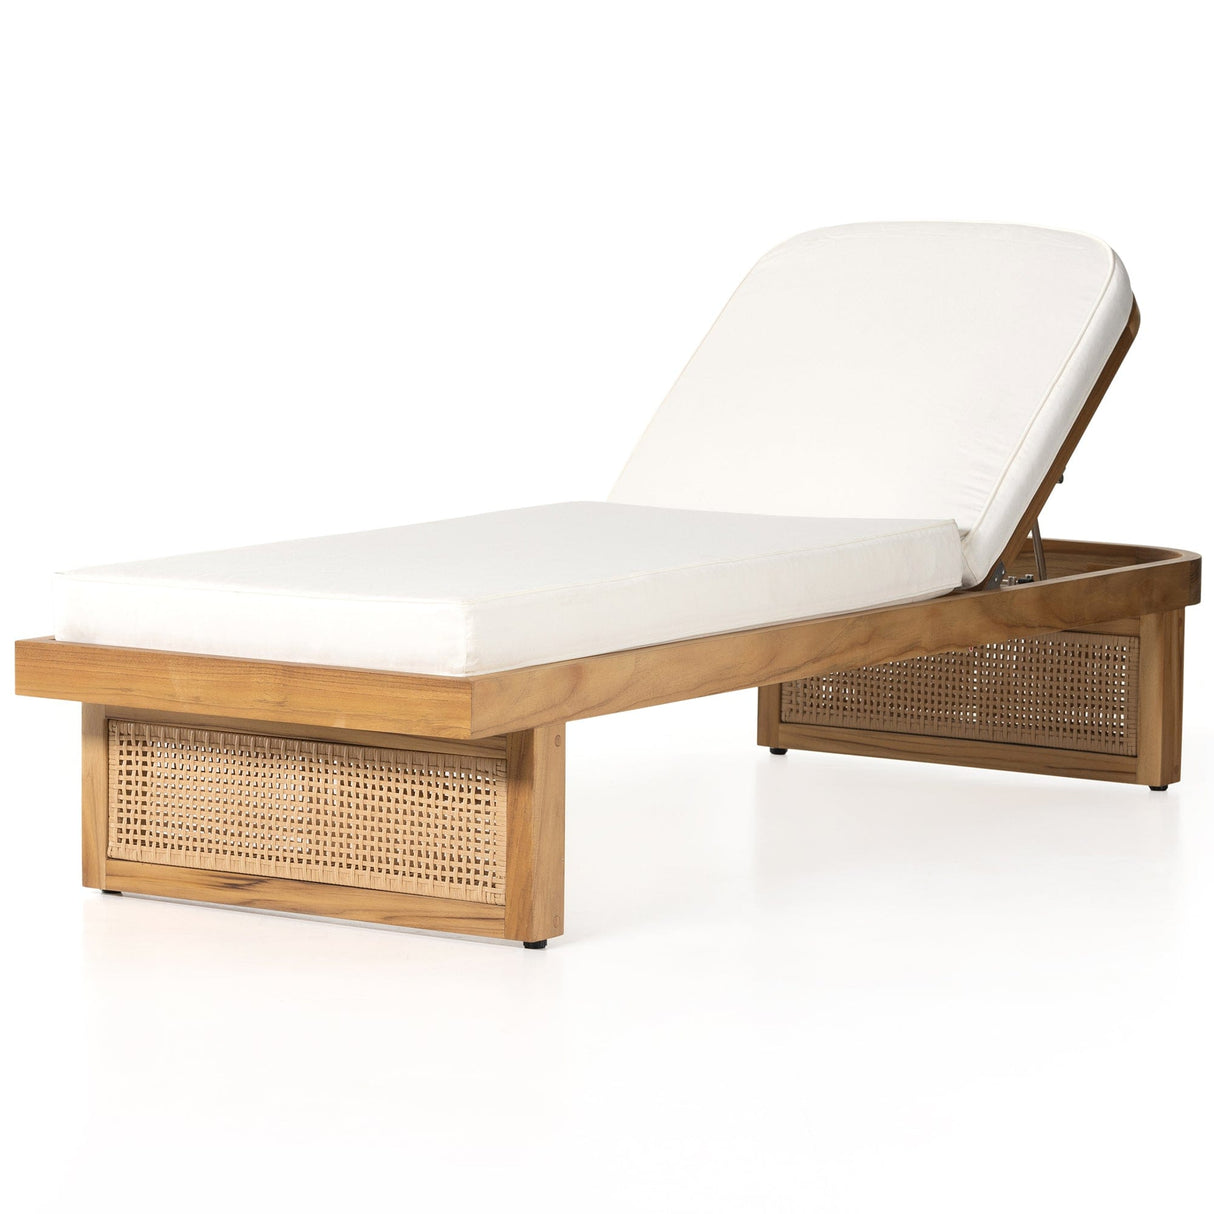 Four Hands Merit Outdoor Chaise Lounge Outdoor Furniture four-hands-229407-001 801542794248